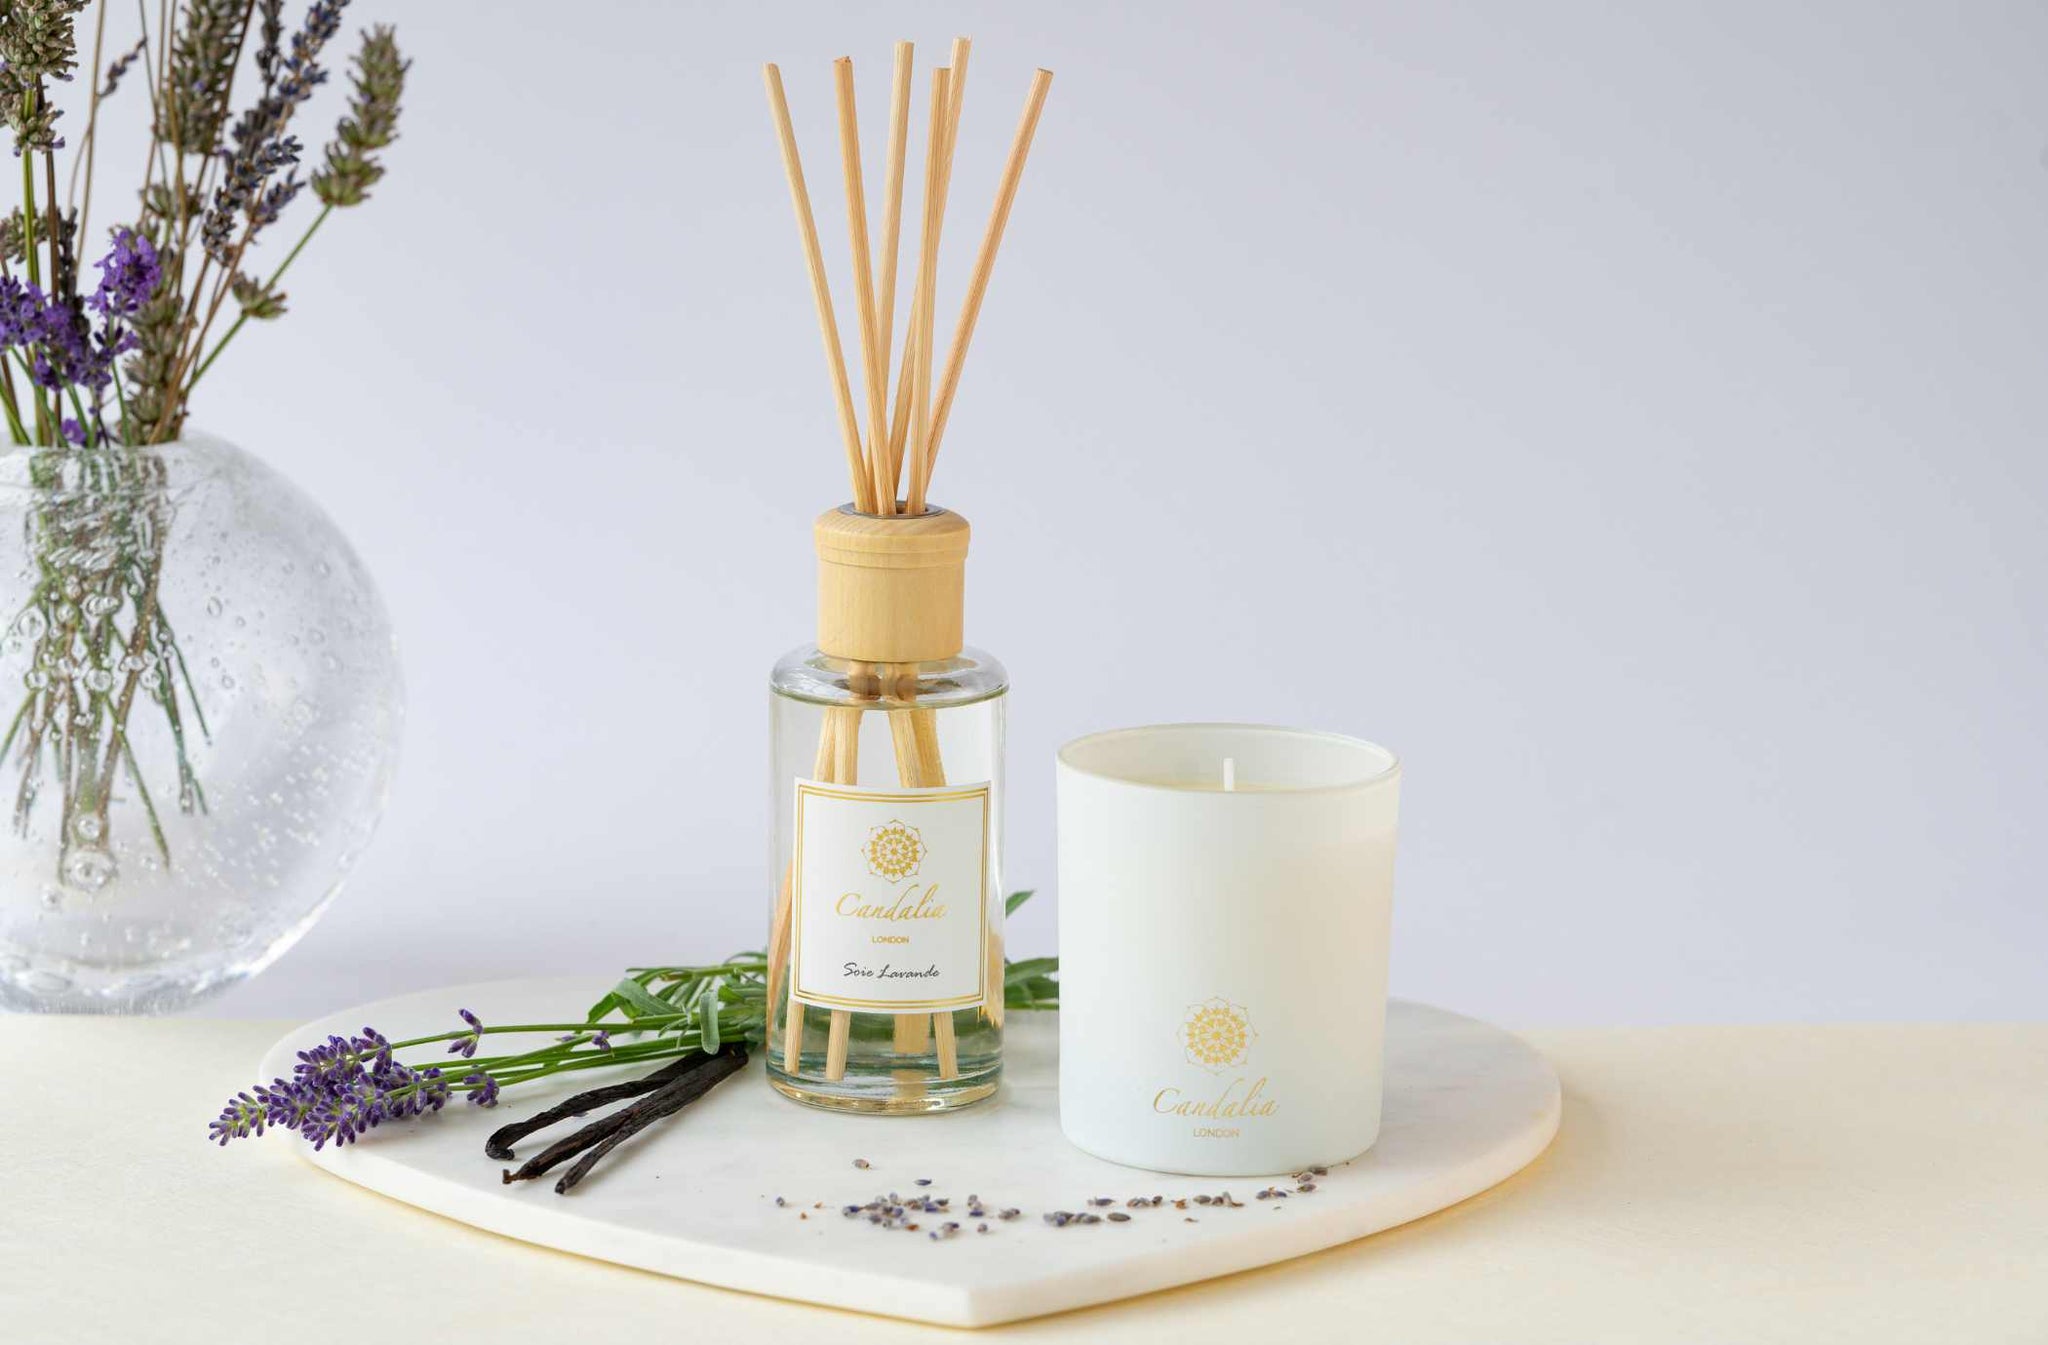 Home fragrance diffuser and candle Soie Lavande